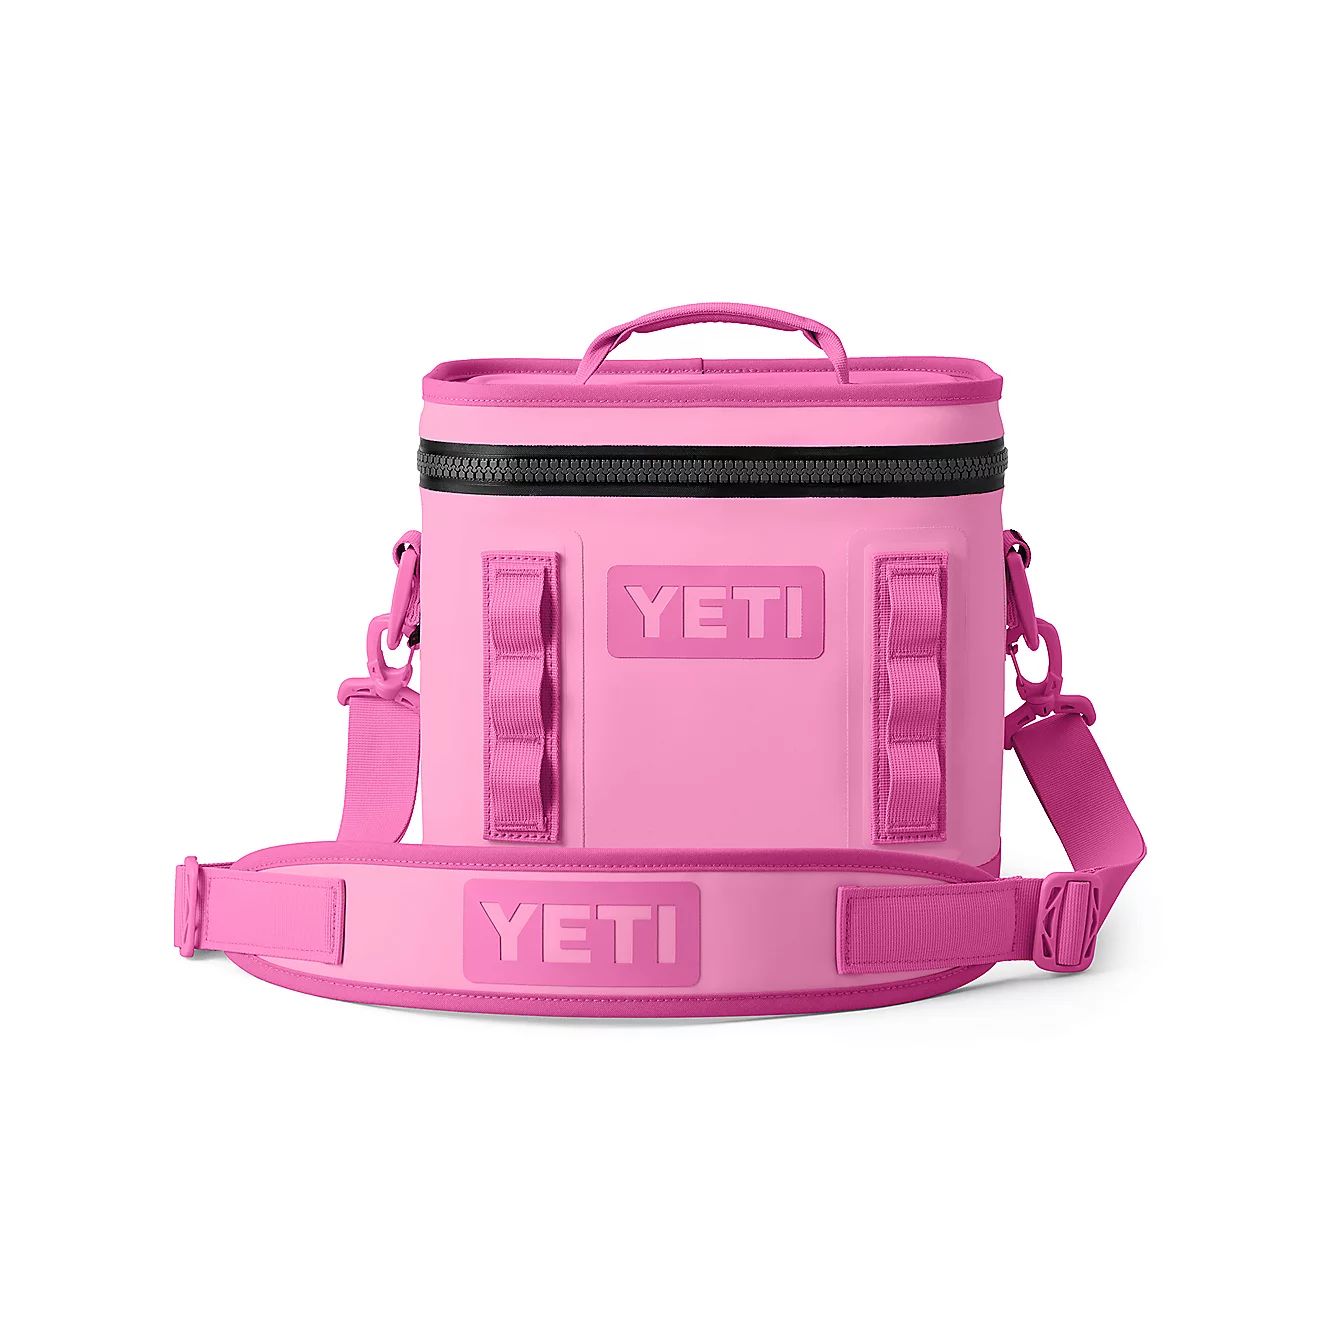 YETI Hopper Flip 8 Soft Cooler | Free Shipping at Academy | Academy Sports + Outdoors